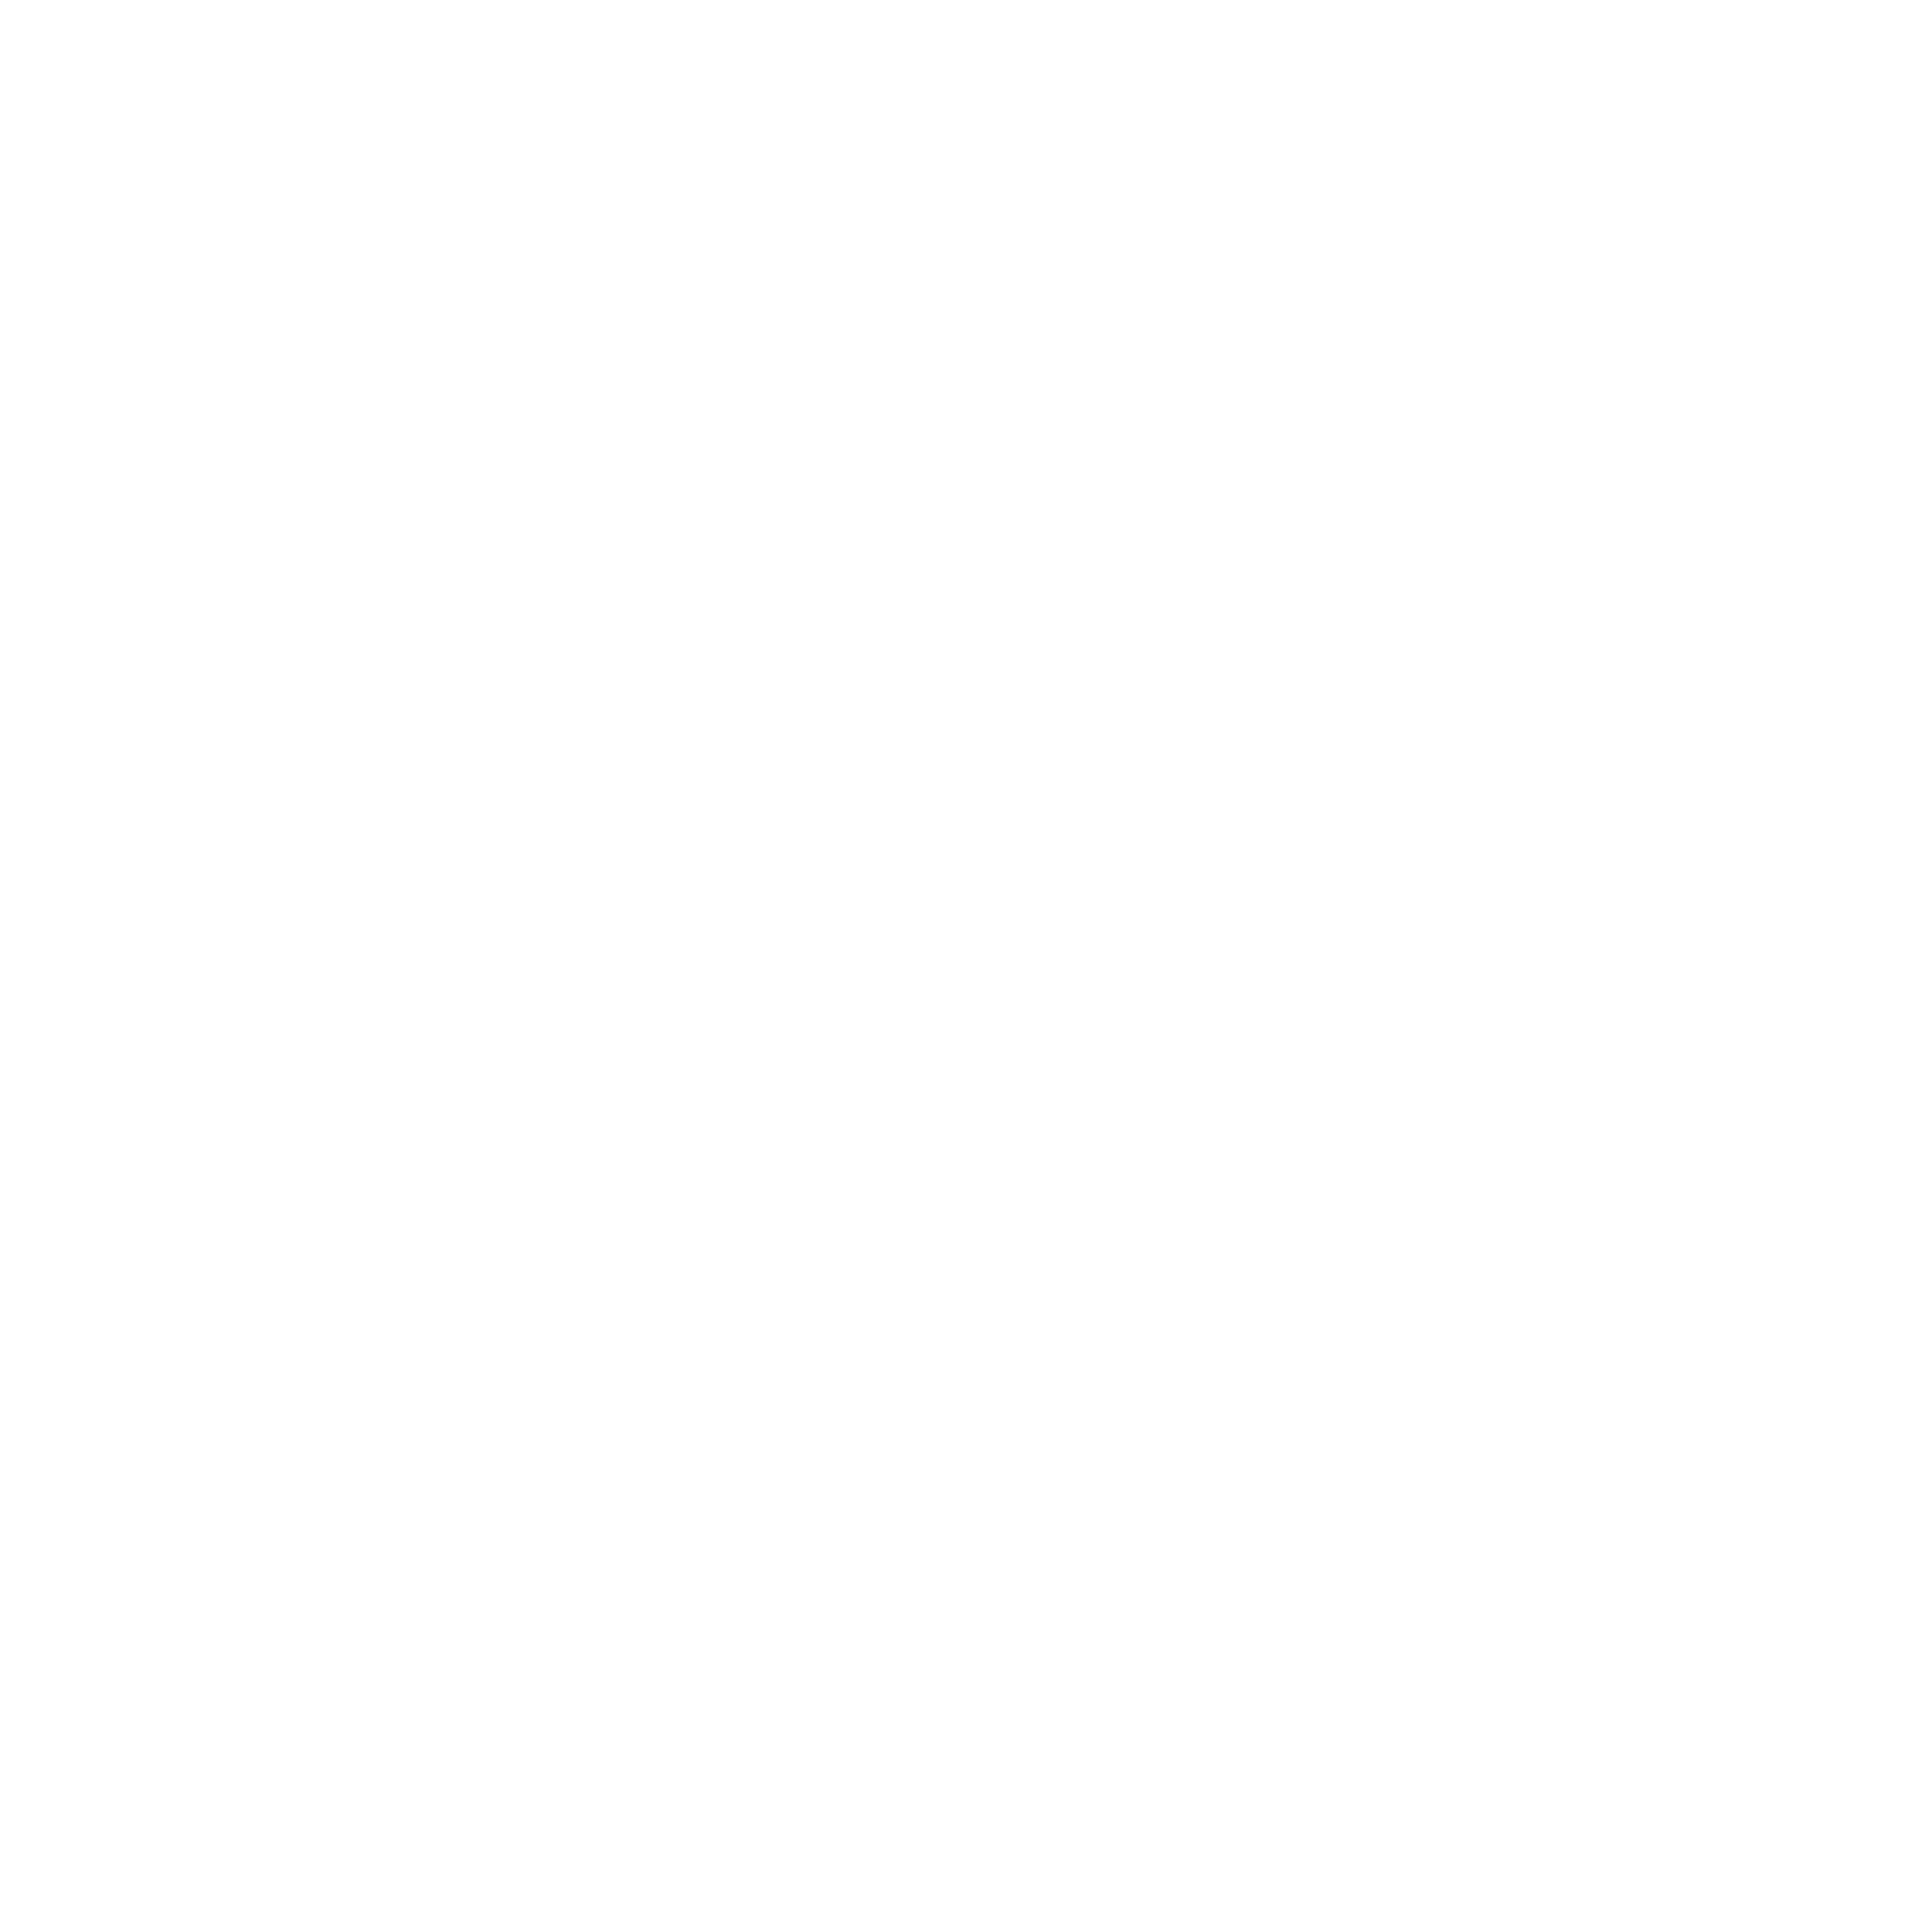 entertainment-weekly-logo-black-and-white-2.png